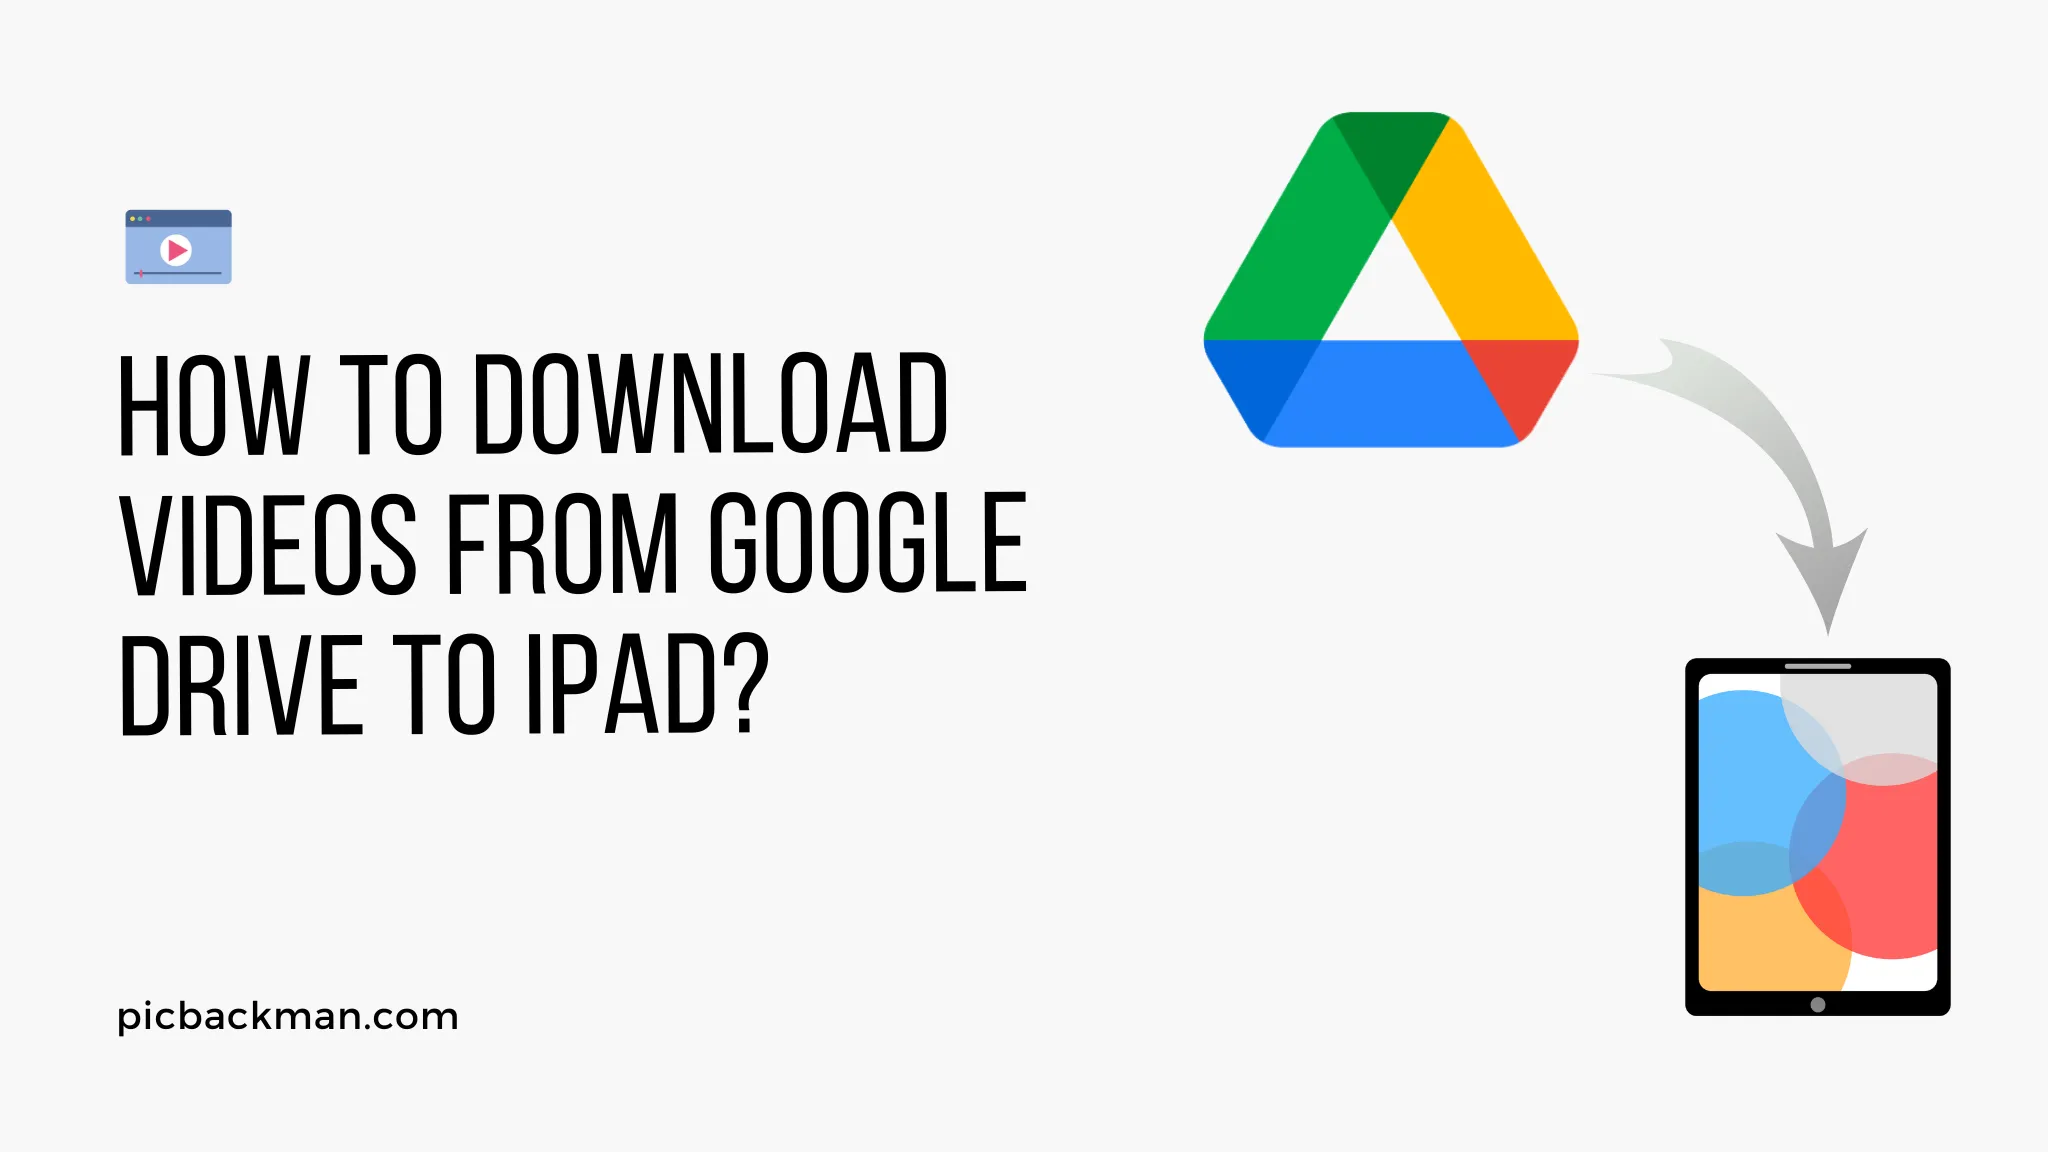 How to Download Videos from Google Drive to iPad